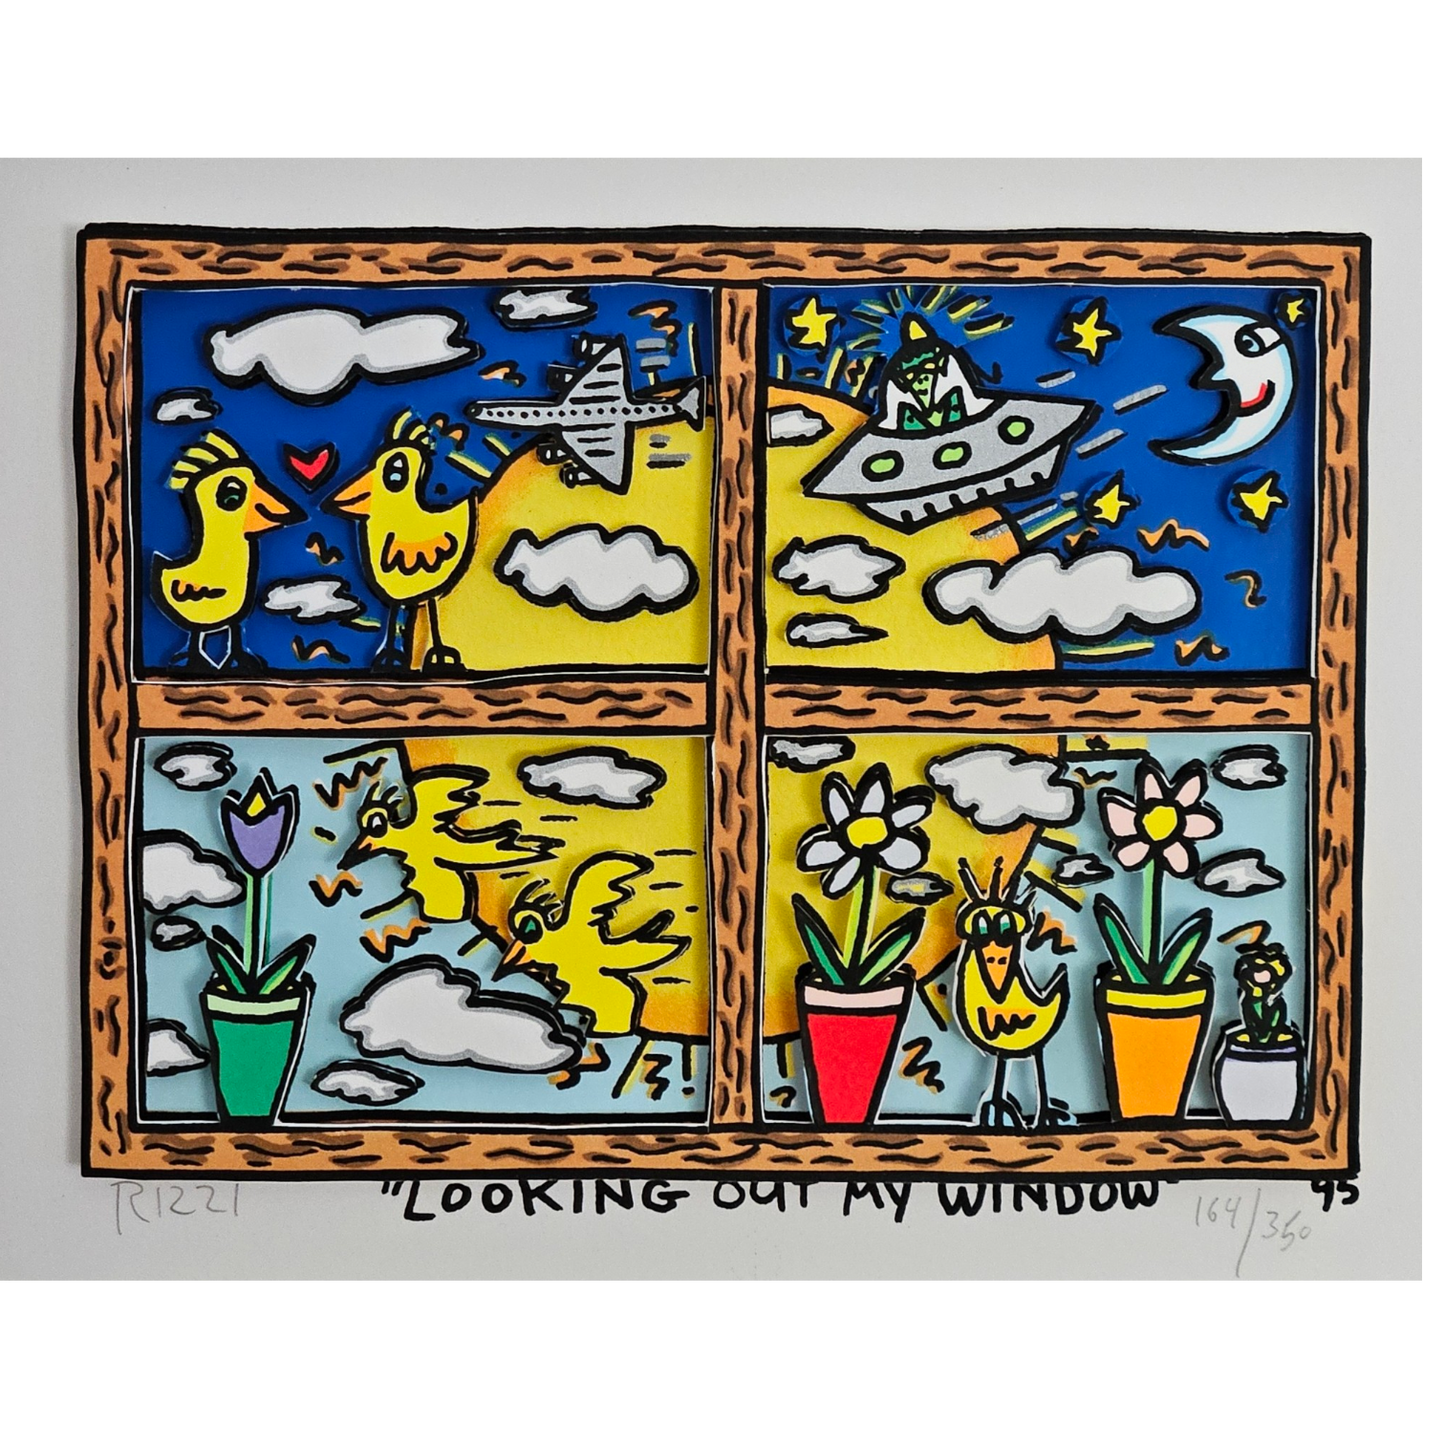 James Rizzi - Looking out My Window (1995)